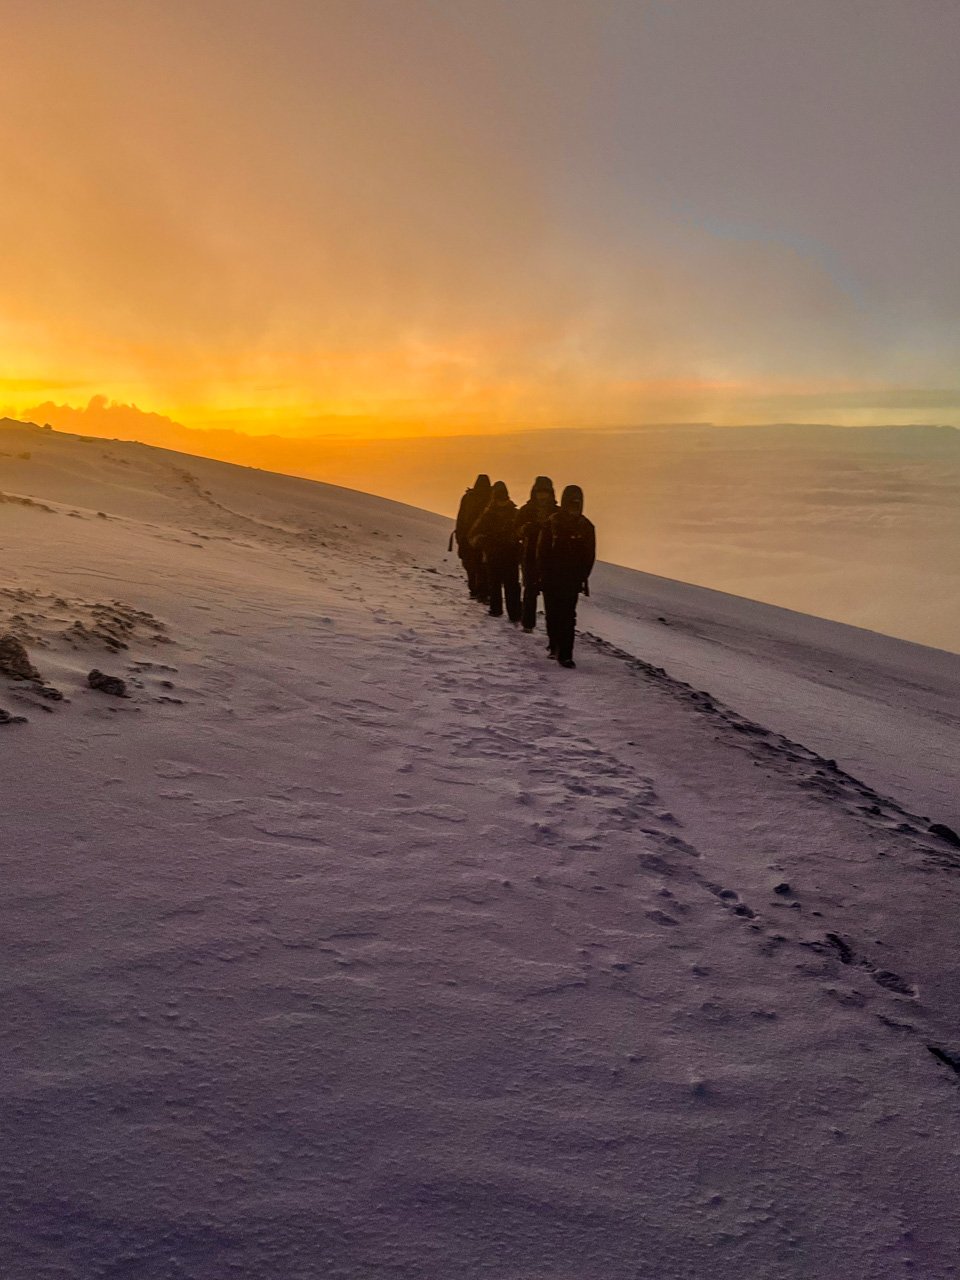 Our group making fresh tracks in the snow on the roof of Africa 